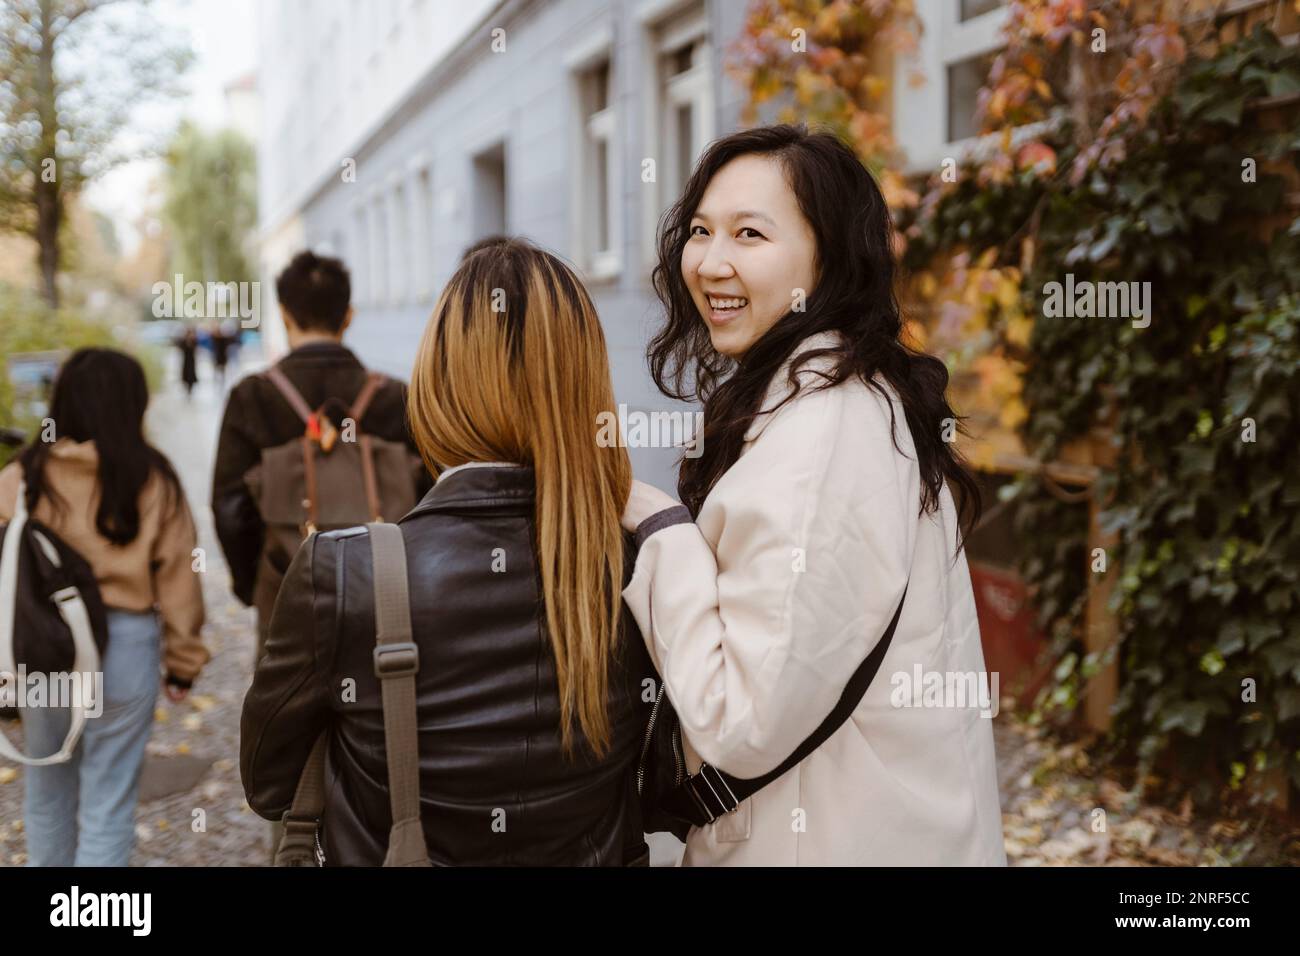 Happy woman looking away while walking with female friend on sidewalk Stock Photo